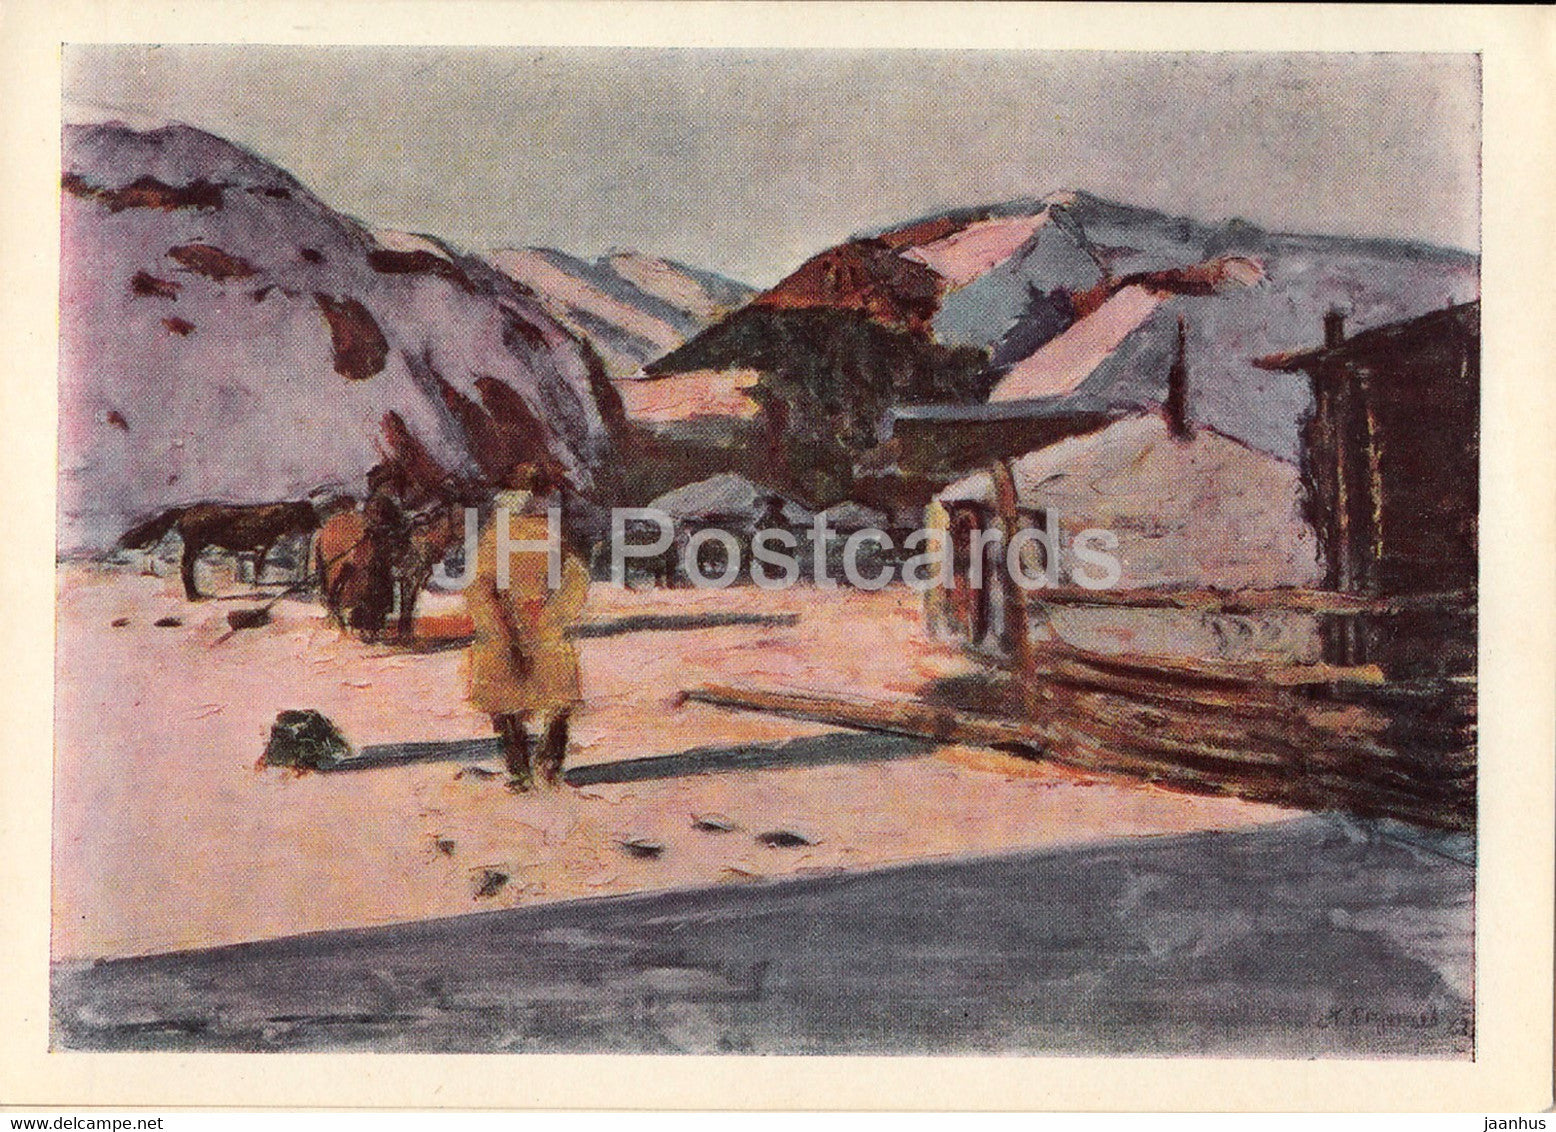 painting by A. Stroganov - The Camp - Mongolian art - 1966 - Russia USSR - unused - JH Postcards